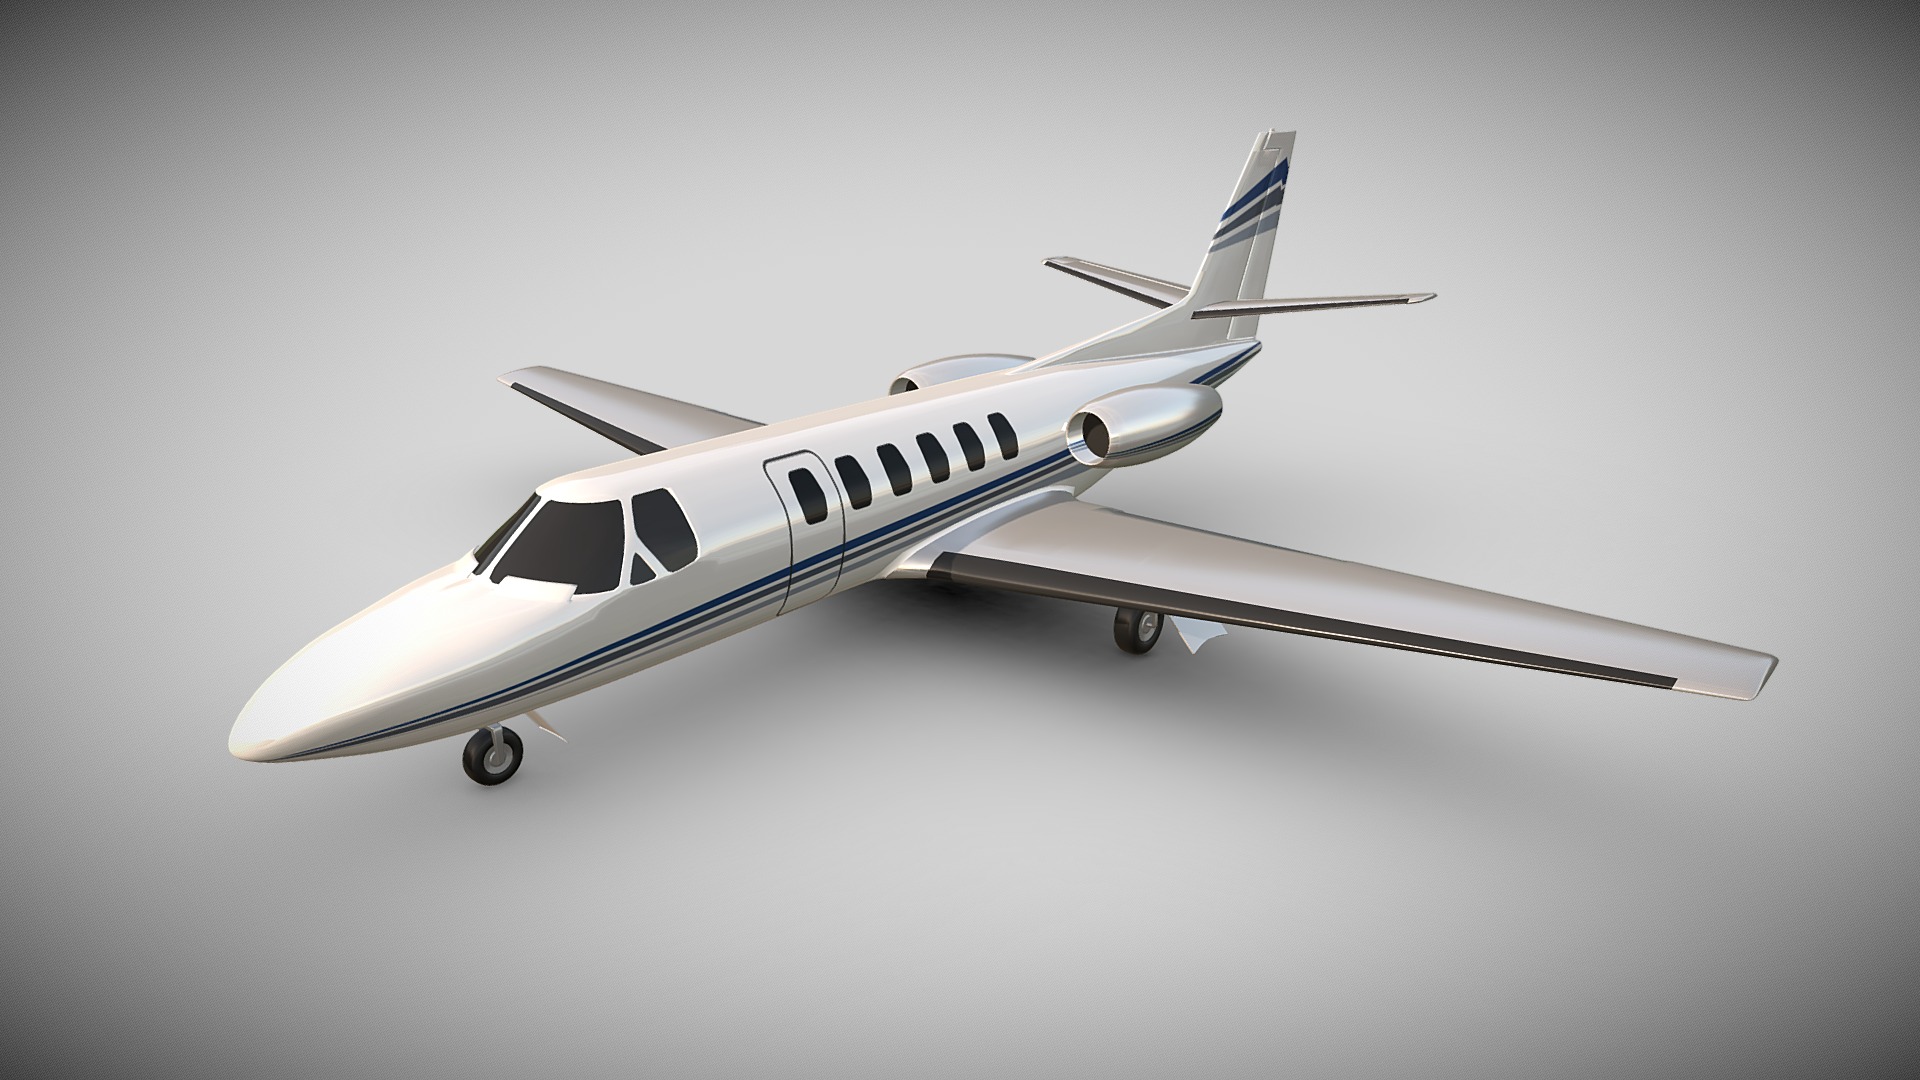 3D model Cessna 550 Citation private jet - This is a 3D model of the Cessna 550 Citation private jet. The 3D model is about a white airplane flying in the sky.